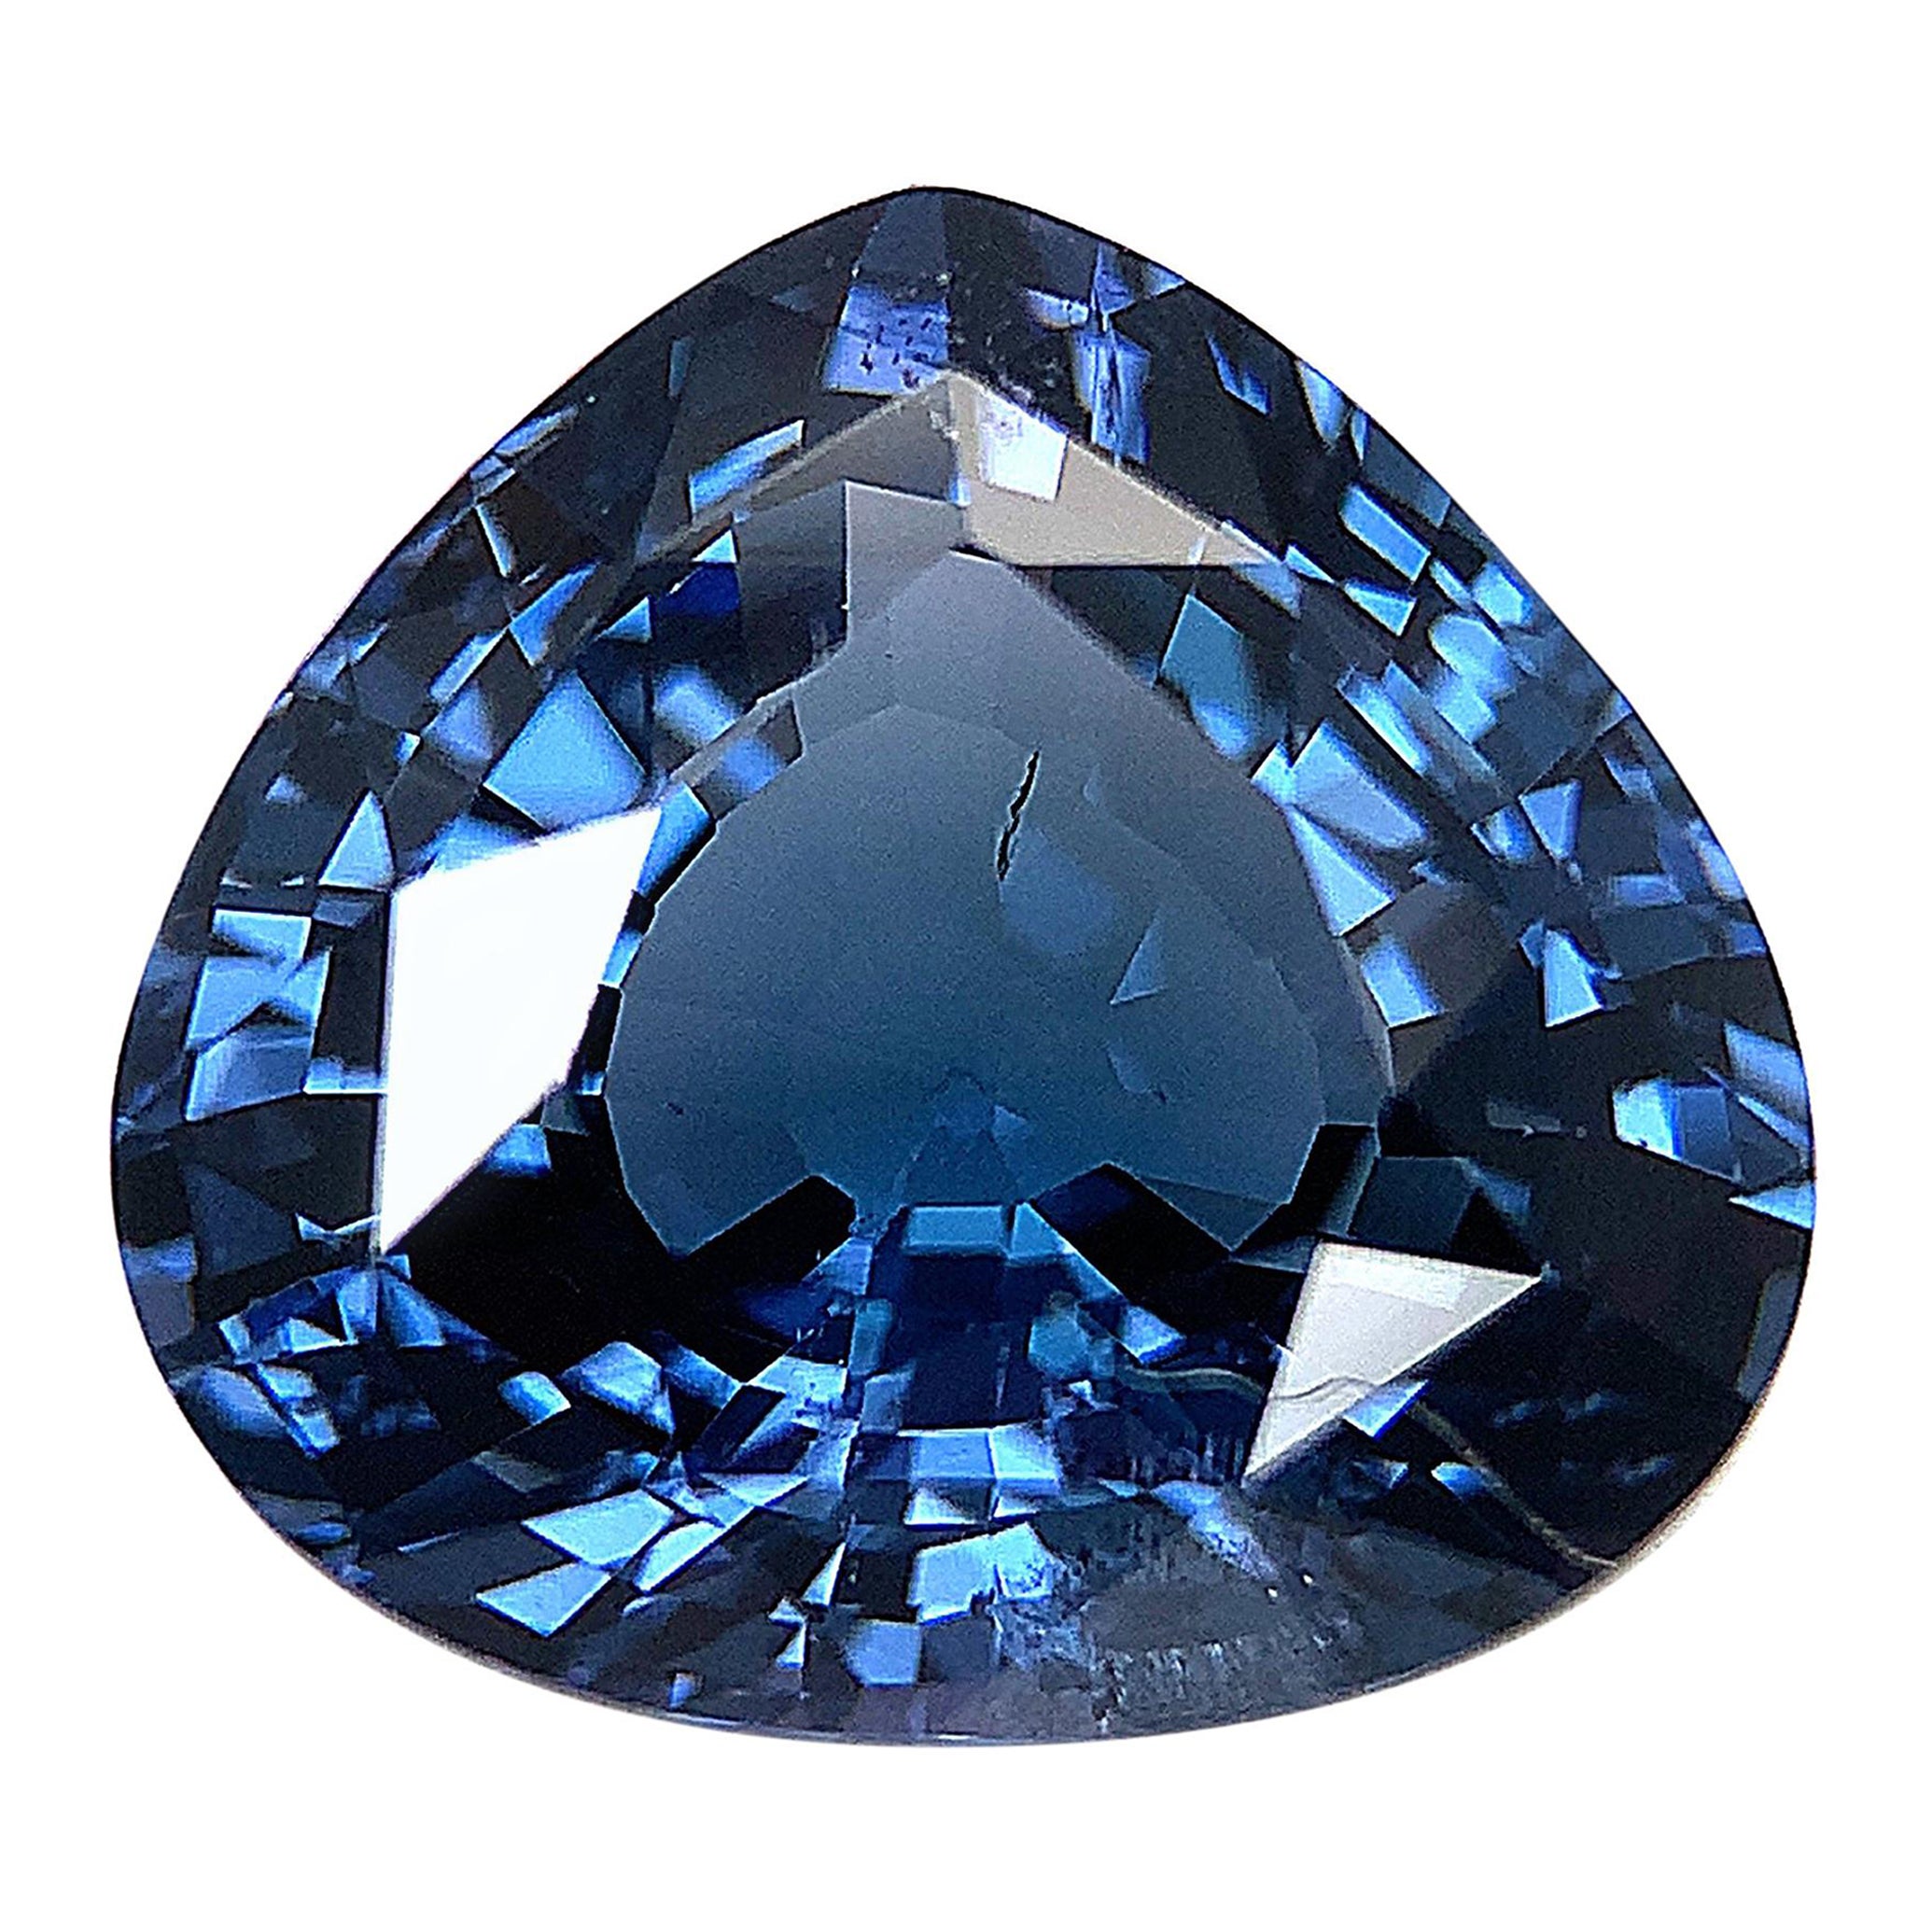 Unheated 5.02 Carat Blue Spinel, Loose Gemstone, GIA Certified ..... A